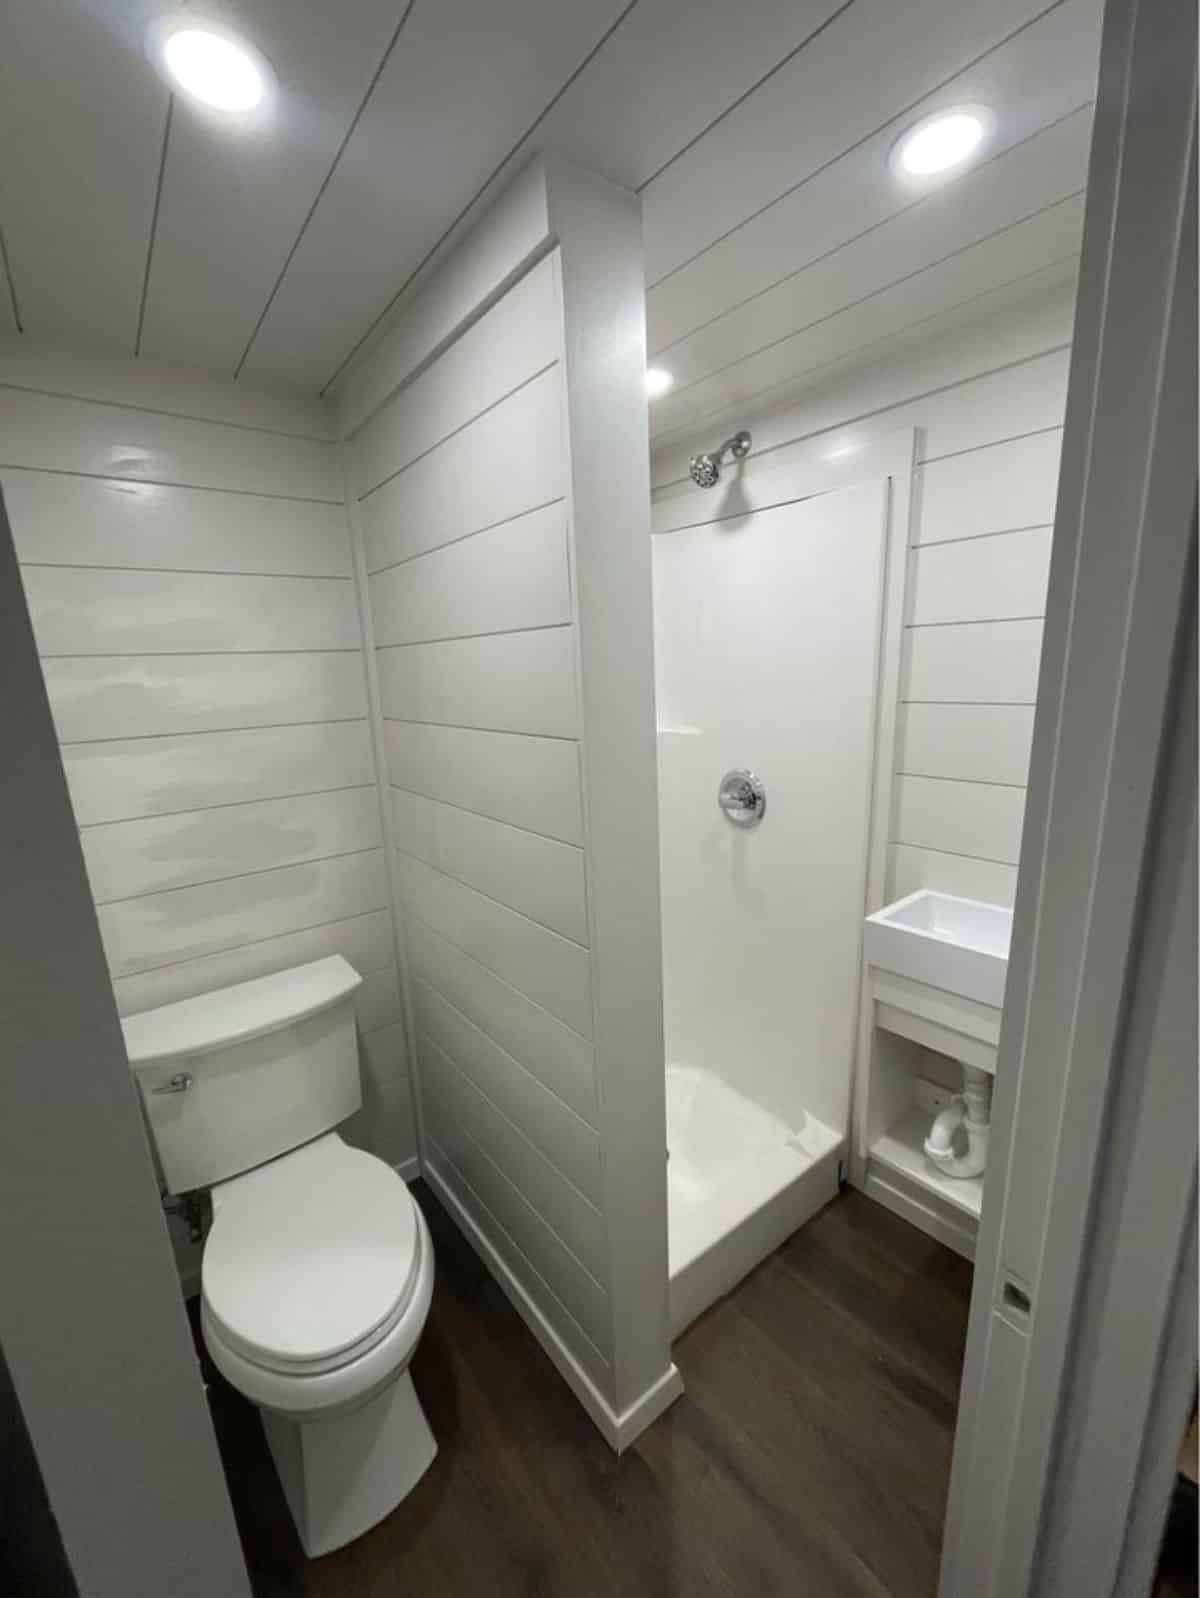 Bathroom of rustic 30’ tiny house has all the standard fittings with separate shower area